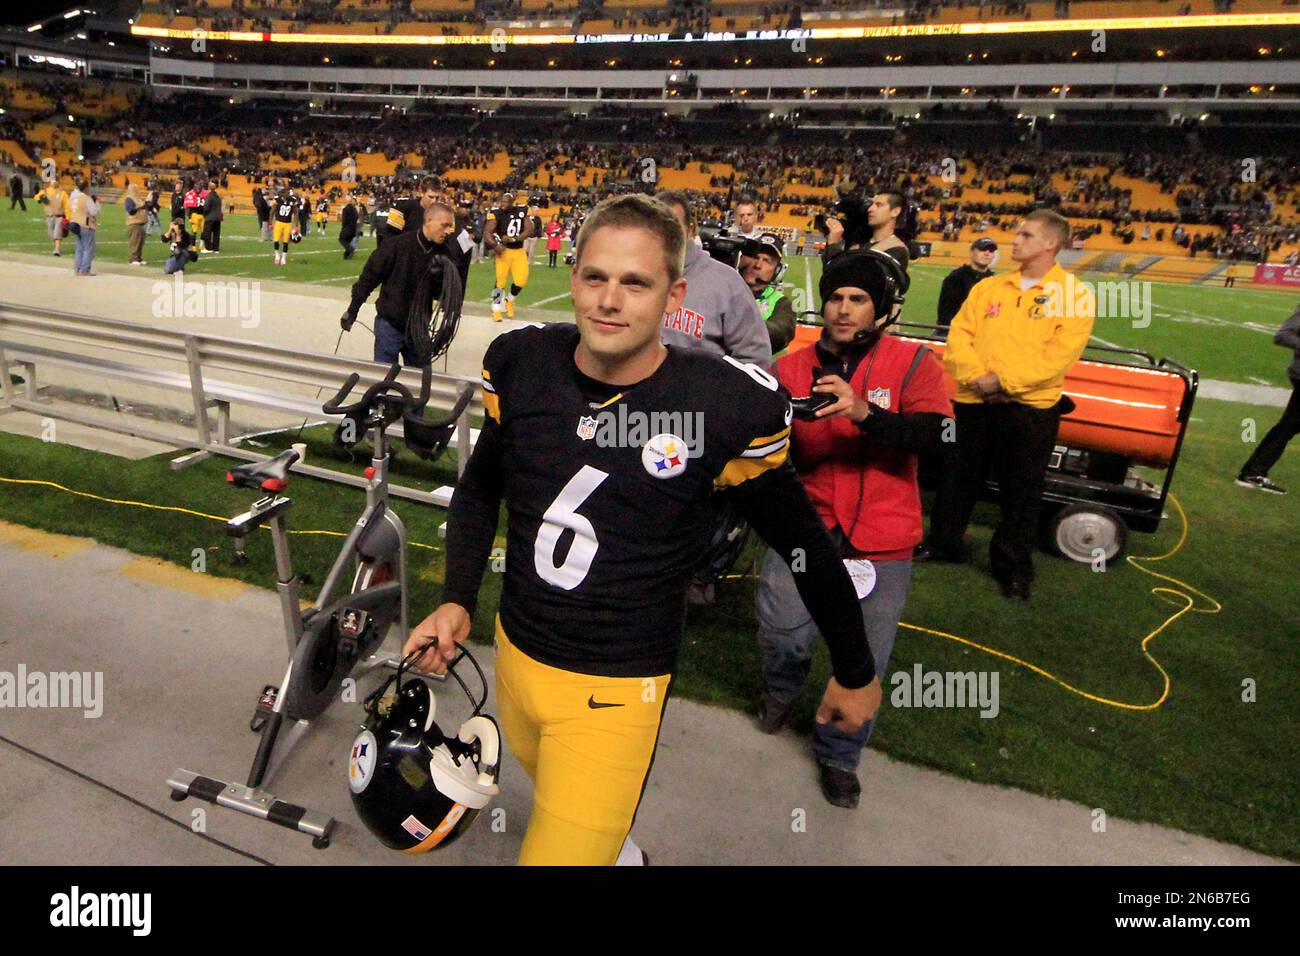 Pittsburgh Steelers kicker Shaun Suisham (6) walks from the field after an  NFL football game against the Baltimore Ravens on Sunday, Oct. 20, 2013, in  Pittsburgh. Suisham kicked a game-winning 42-yard field